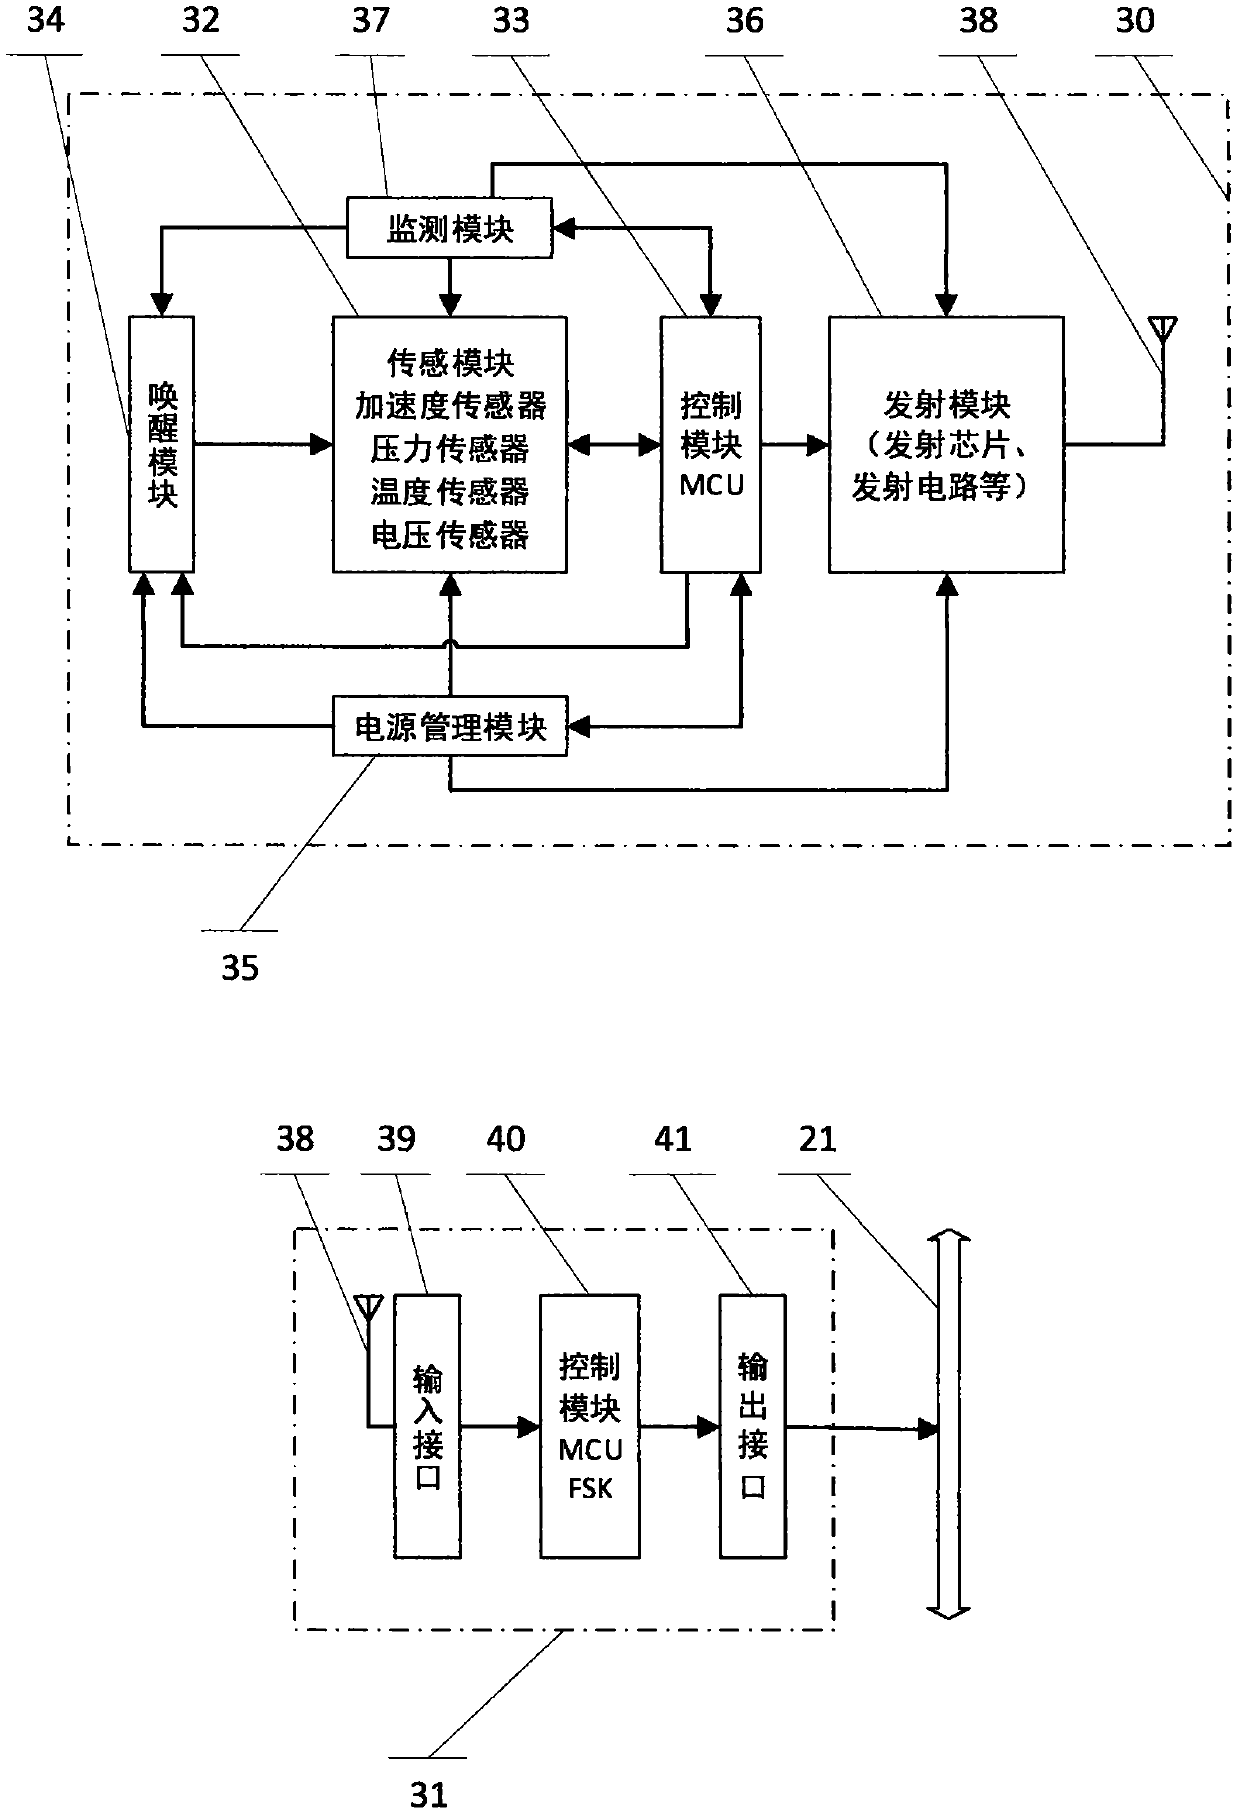 Automobile tire burst safety and stability control method